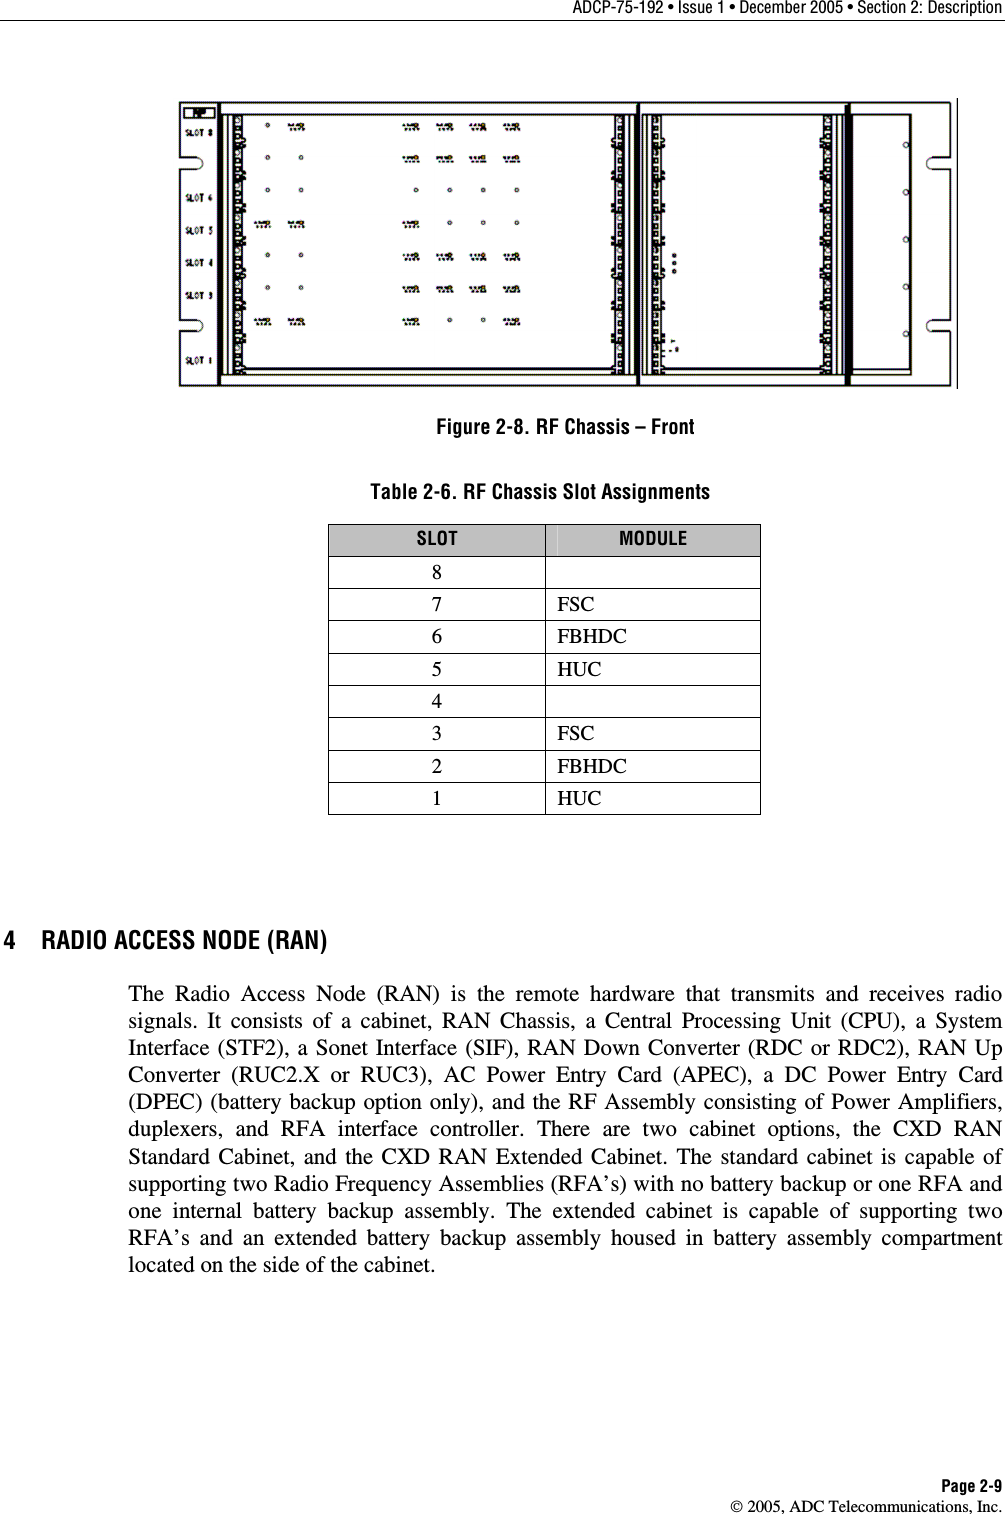 ADCP-75-192 • Issue 1 • December 2005 • Section 2: Description Page 2-9  2005, ADC Telecommunications, Inc.  Figure 2-8. RF Chassis – Front Table 2-6. RF Chassis Slot Assignments SLOT  MODULE 8  7 FSC 6 FBHDC 5 HUC 4  3 FSC 2 FBHDC 1 HUC 4  RADIO ACCESS NODE (RAN) The Radio Access Node (RAN) is the remote hardware that transmits and receives radio signals. It consists of a cabinet, RAN Chassis, a Central Processing Unit (CPU), a System Interface (STF2), a Sonet Interface (SIF), RAN Down Converter (RDC or RDC2), RAN Up Converter (RUC2.X or RUC3), AC Power Entry Card (APEC), a DC Power Entry Card (DPEC) (battery backup option only), and the RF Assembly consisting of Power Amplifiers, duplexers, and RFA interface controller. There are two cabinet options, the CXD RAN Standard Cabinet, and the CXD RAN Extended Cabinet. The standard cabinet is capable of supporting two Radio Frequency Assemblies (RFA’s) with no battery backup or one RFA and one internal battery backup assembly. The extended cabinet is capable of supporting two RFA’s and an extended battery backup assembly housed in battery assembly compartment located on the side of the cabinet. 